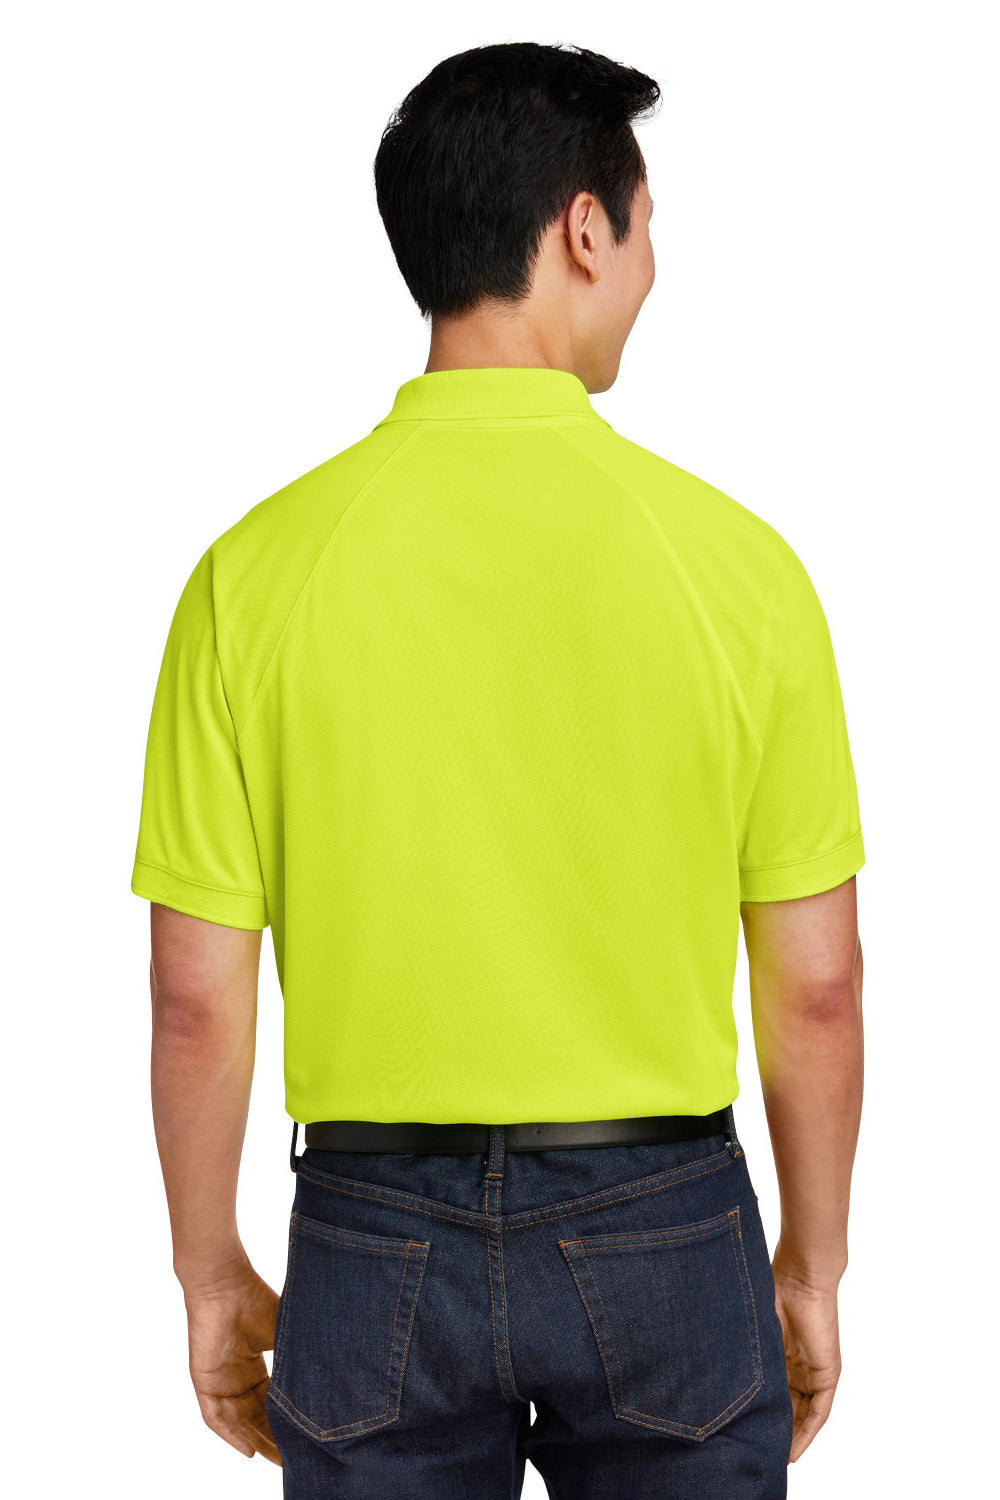 Harriton M208 Mens Charge Moisture Wicking Short Sleeve Polo Shirt Safety Yellow Back